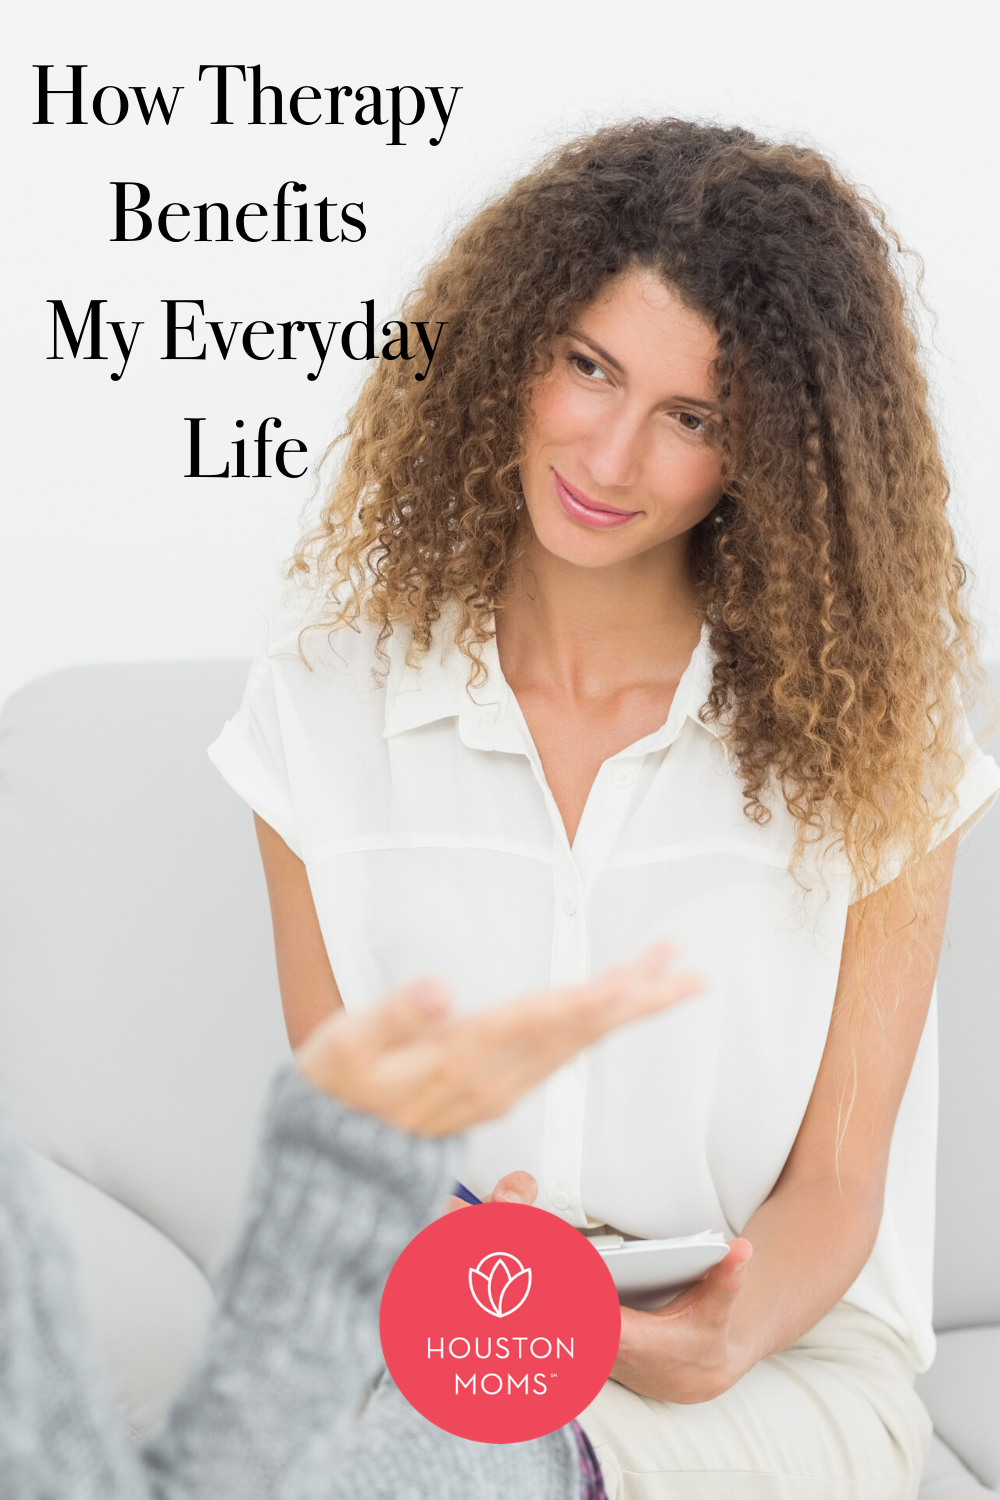 Houston Moms "How Therapy Benefits My Everyday Life" #houstonmoms #houstonmomsblog #momsaroundhouston